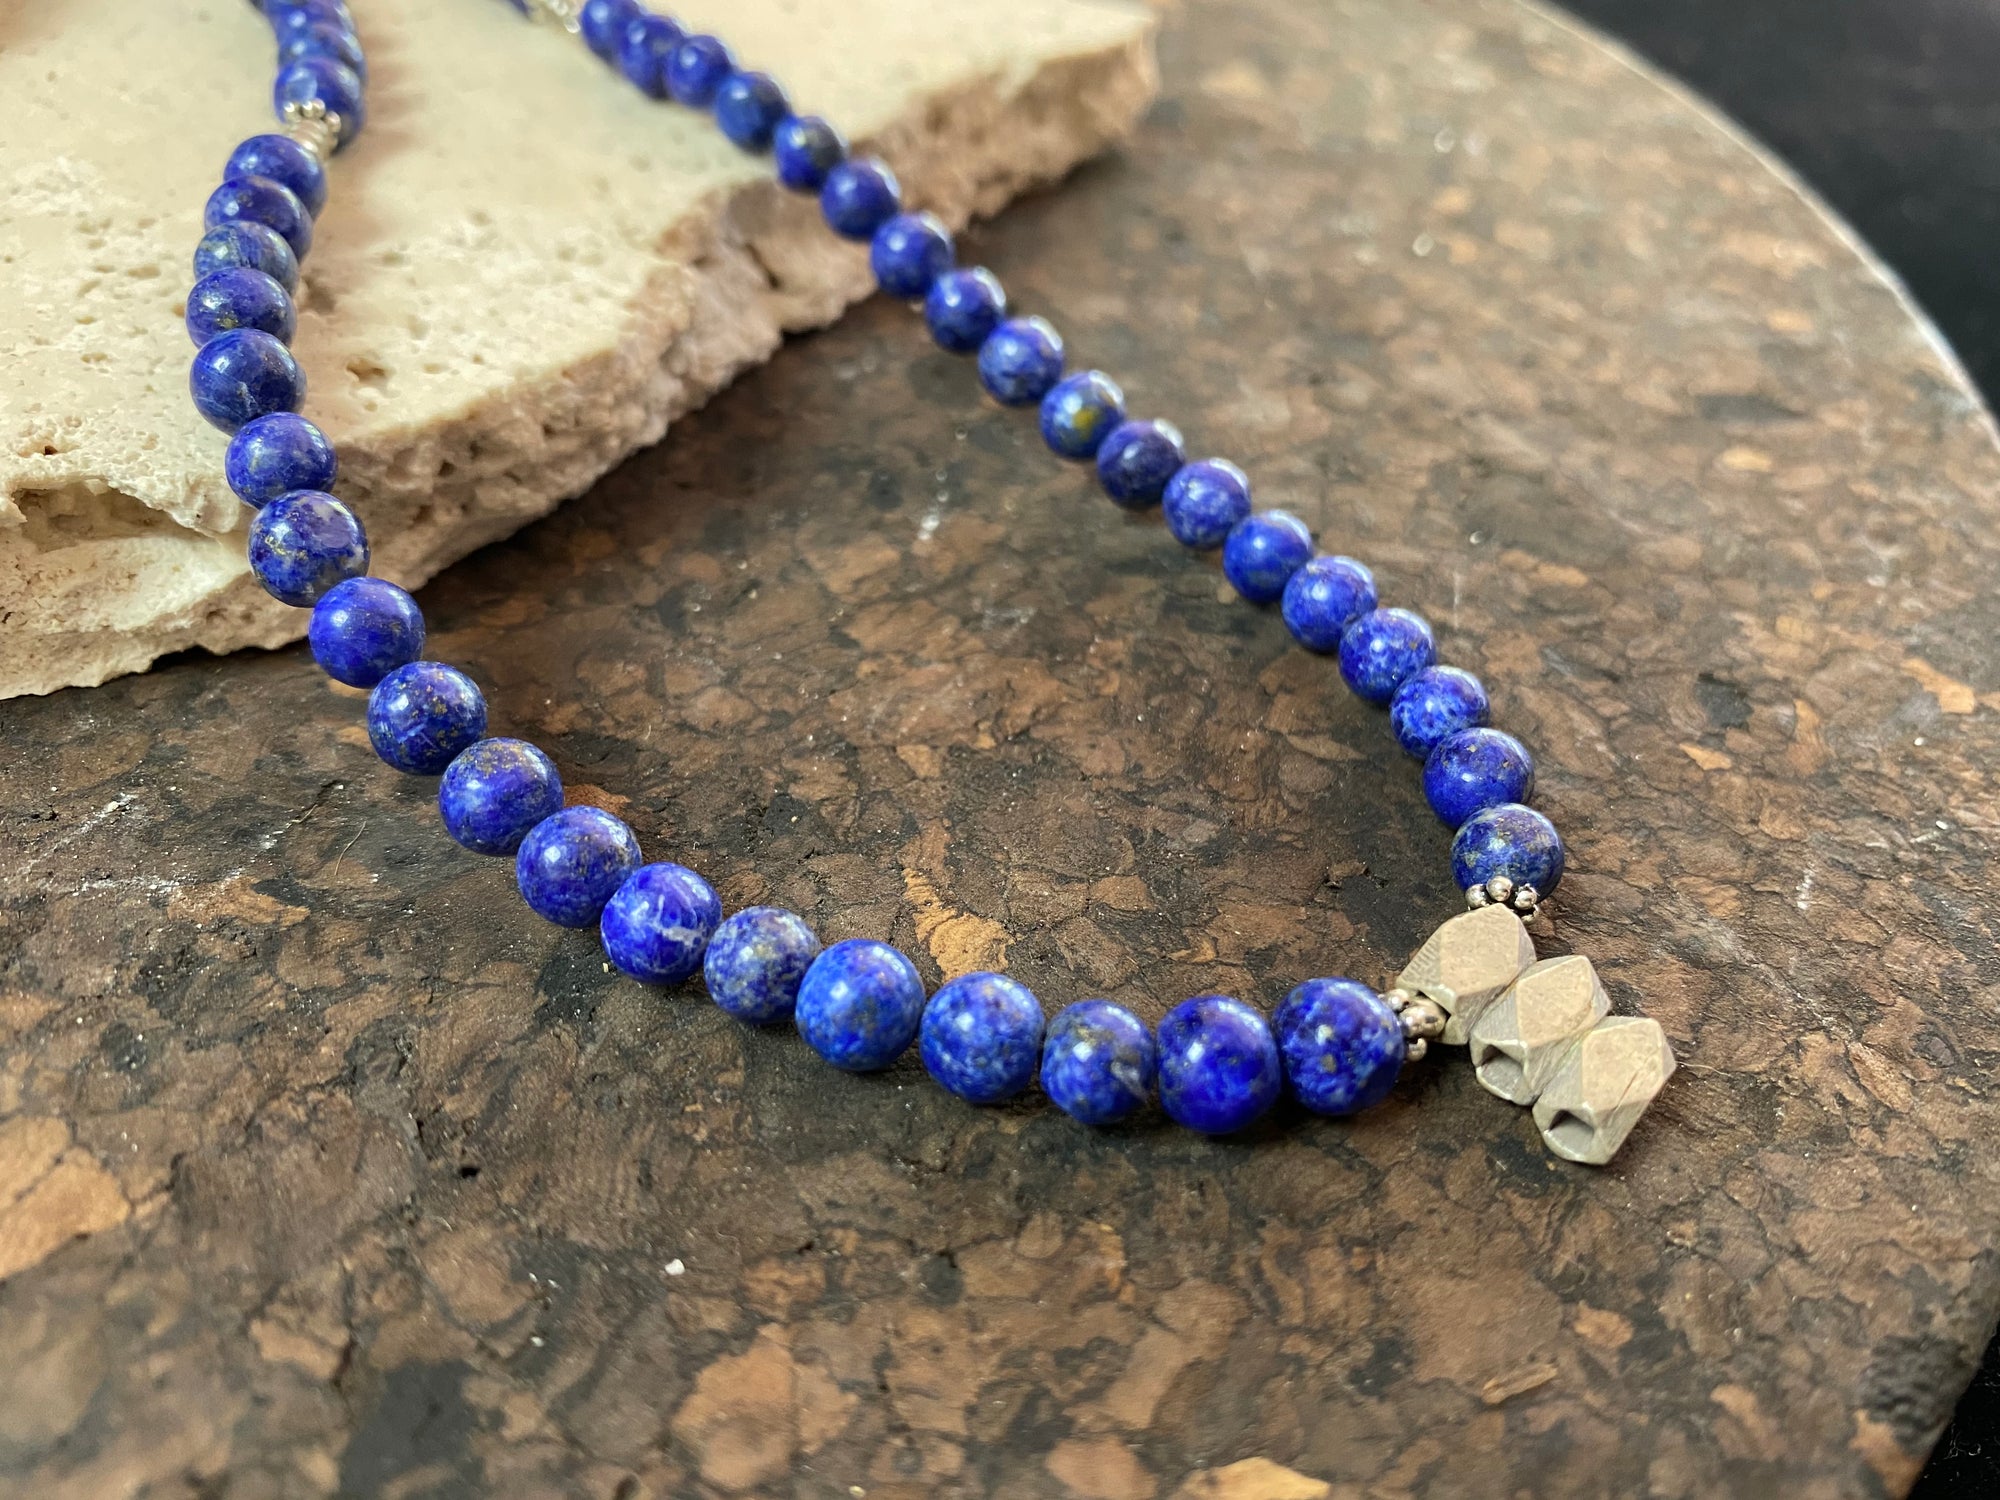 Lapis lazuli bead and silver pendant necklace. Natural lapis and sterling silver or higher grade. 